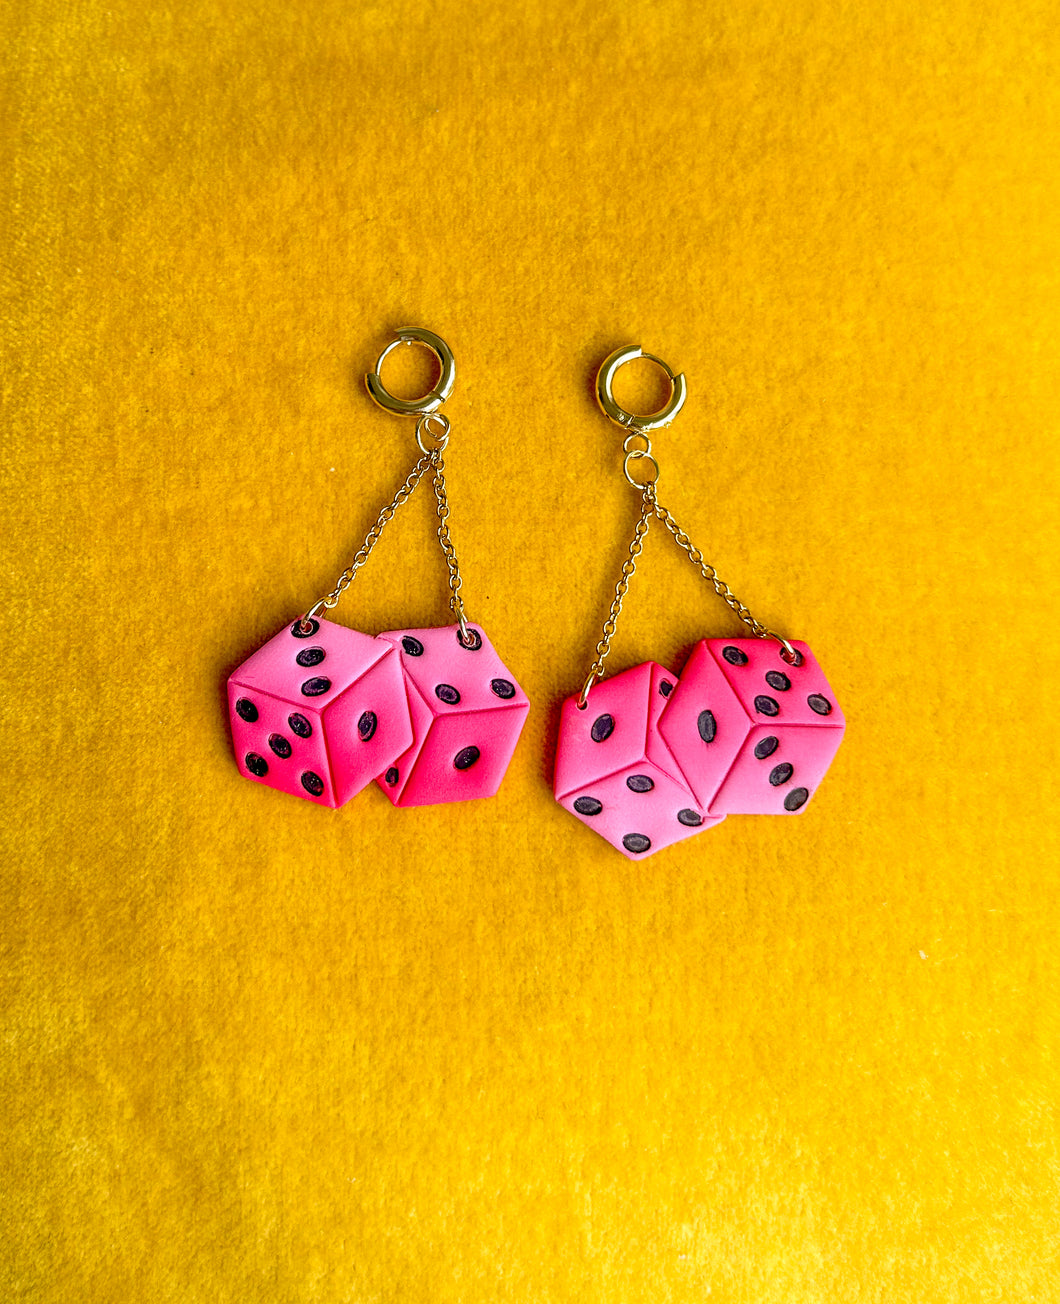 Pair-a-dice - Pink Ombre